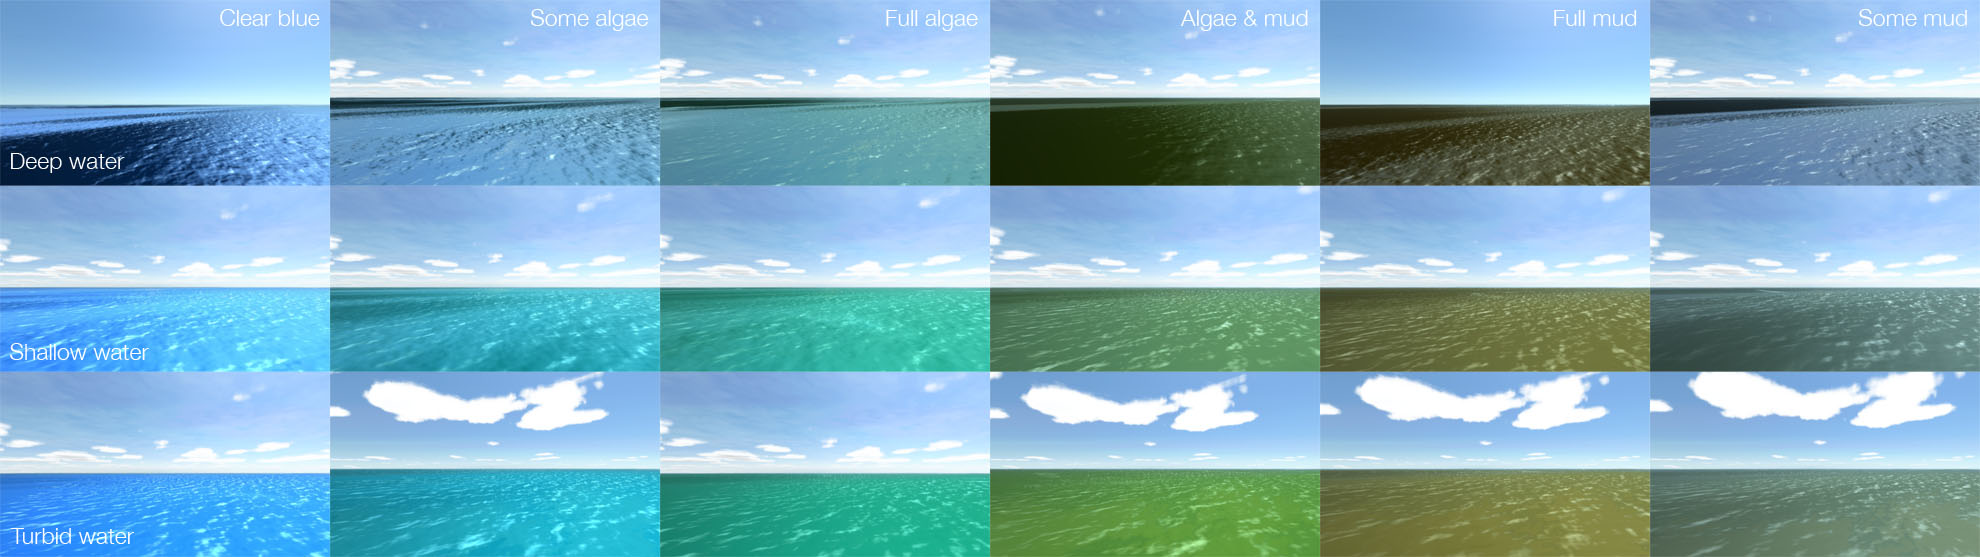 Ocean colors. The ocean for the new global sailing simulator now has a new shader, that behaves just like the real ocean does. When the water is compl...